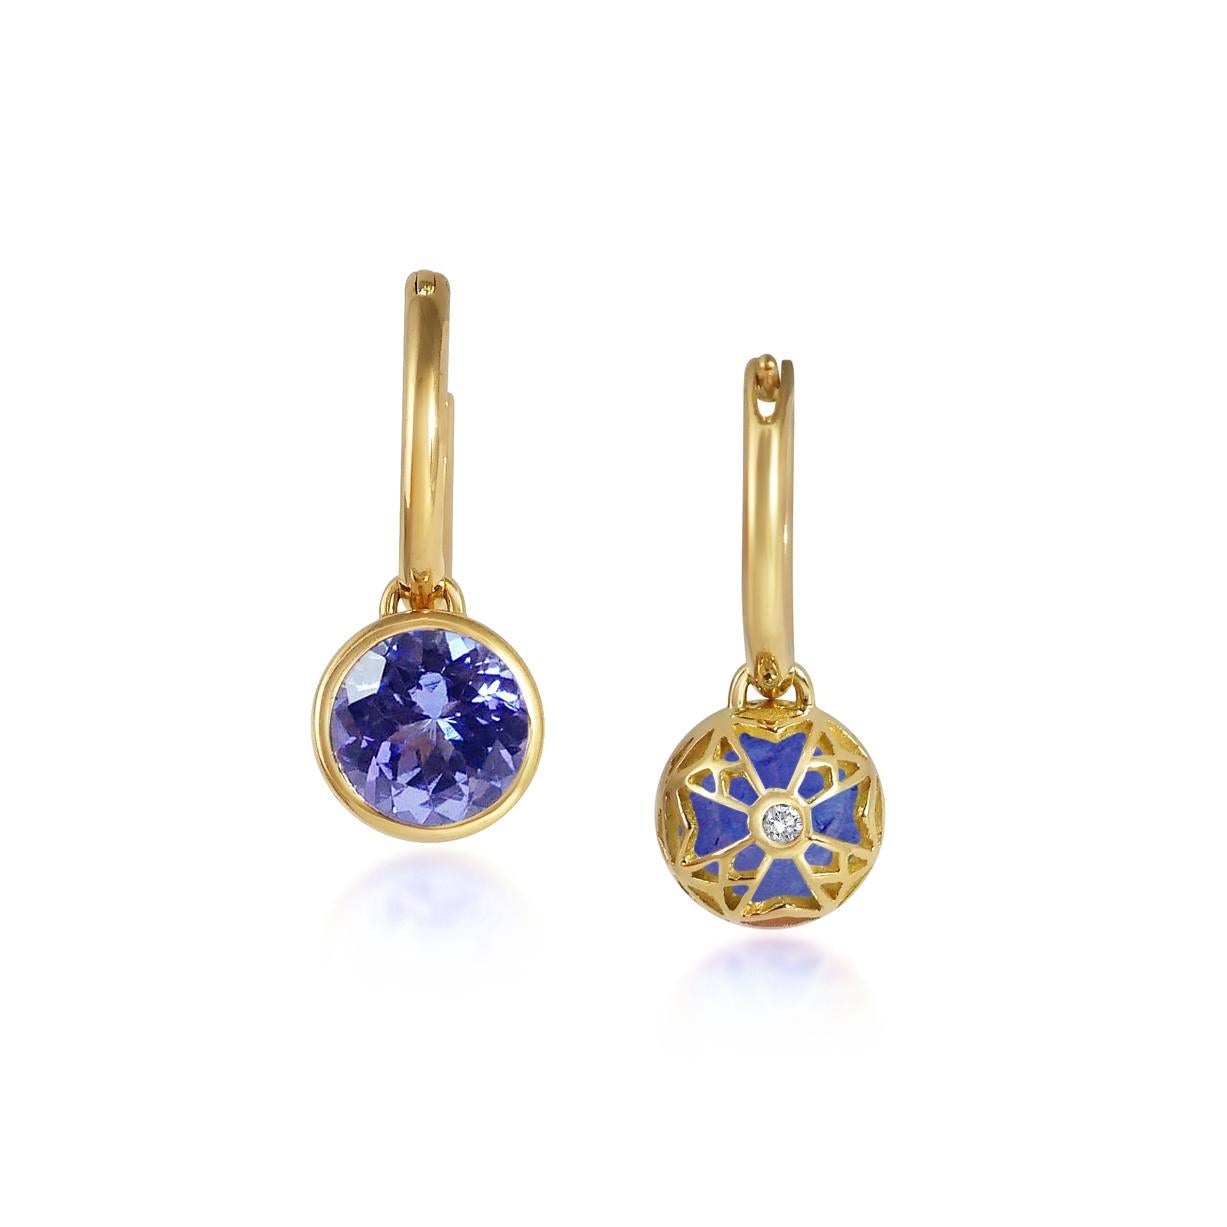 Handcrafted 2.80 Carats Tanzanite 18 Karat Yellow Gold Drop Earrings. The 8mm natural stones are set in our iconic hand pierced gold lace to let the light through. Our precious and fine stones on our dangling earrings are highlighted by a diamond on